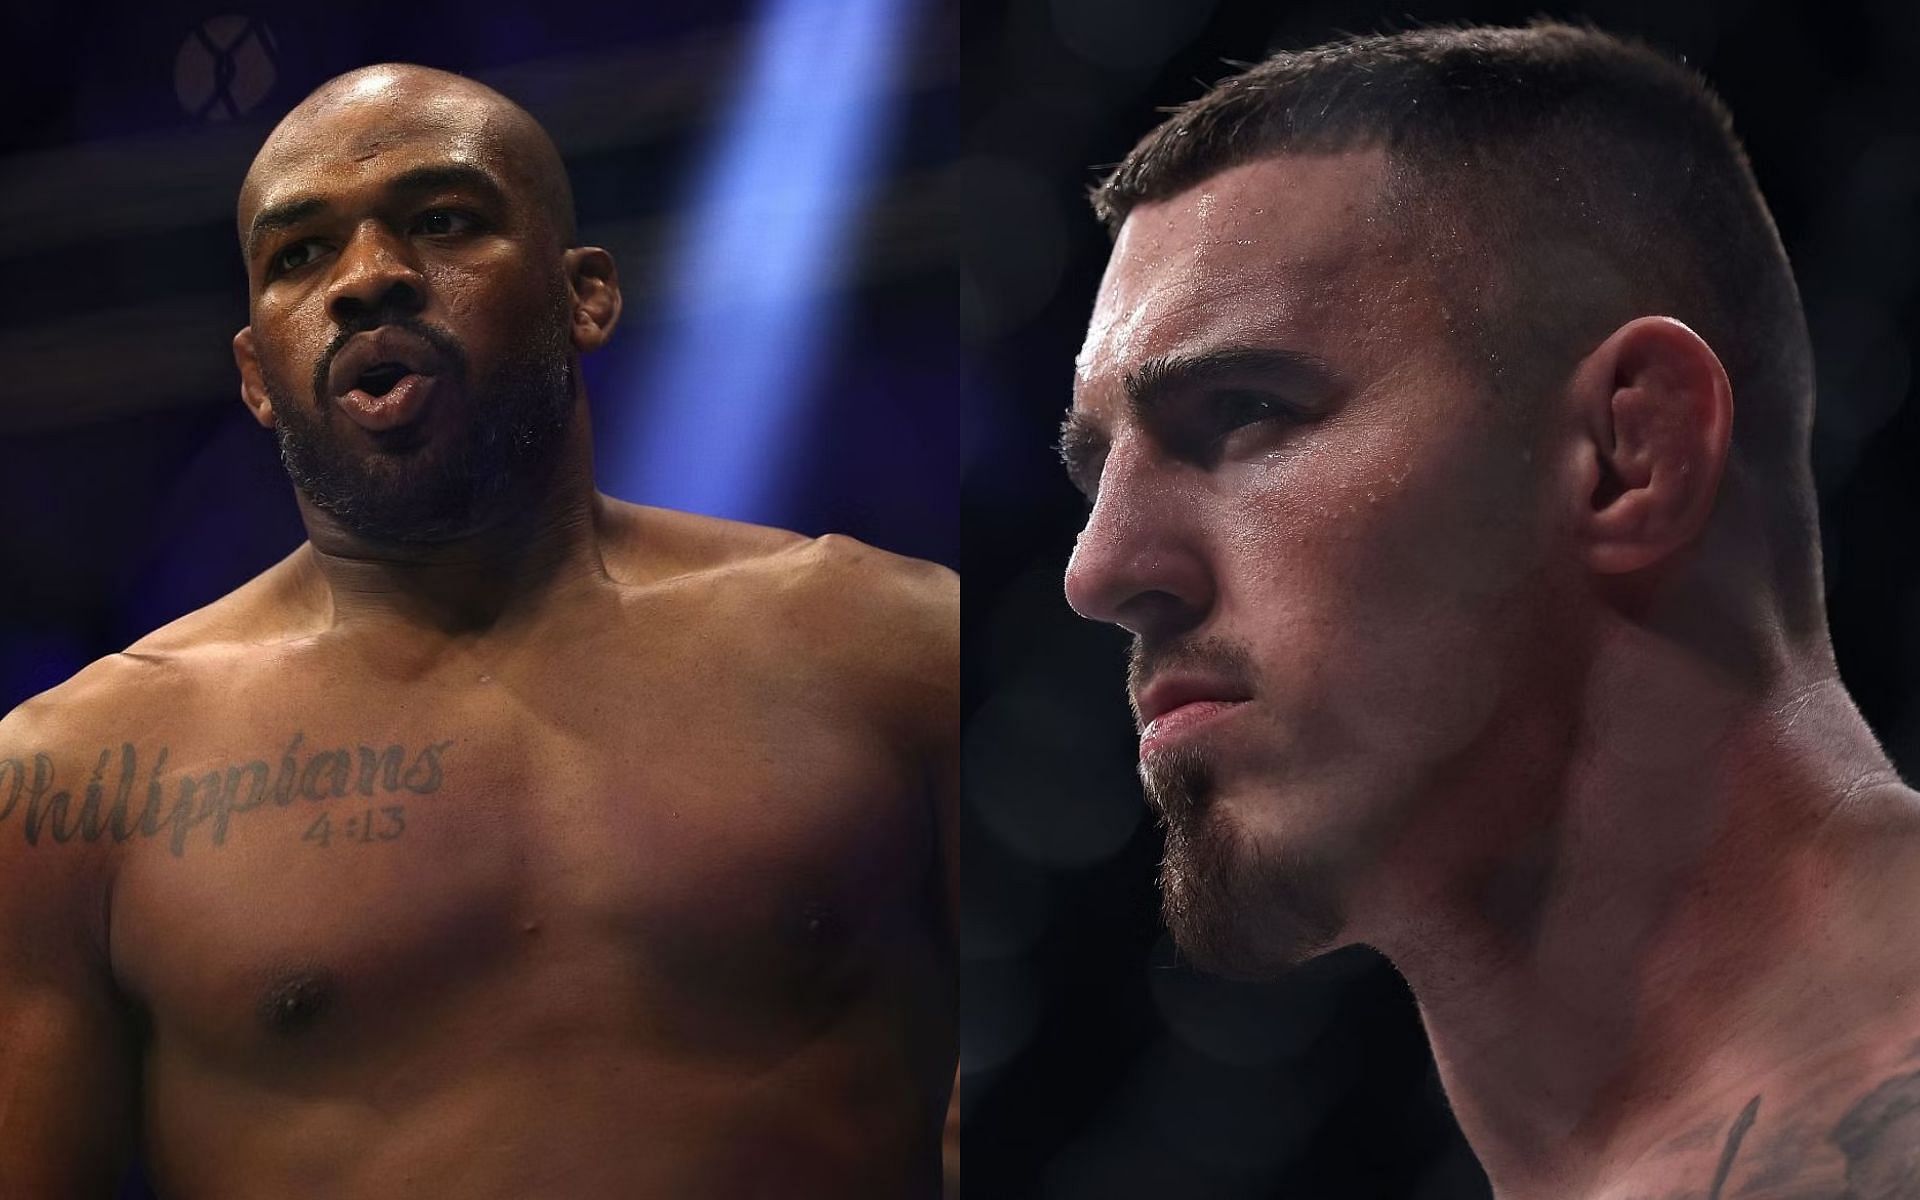 Tom Aspinall explains why he approached his meetup with Jon Jones devoid of hostility or agitation [Image courtesy: Getty Images]